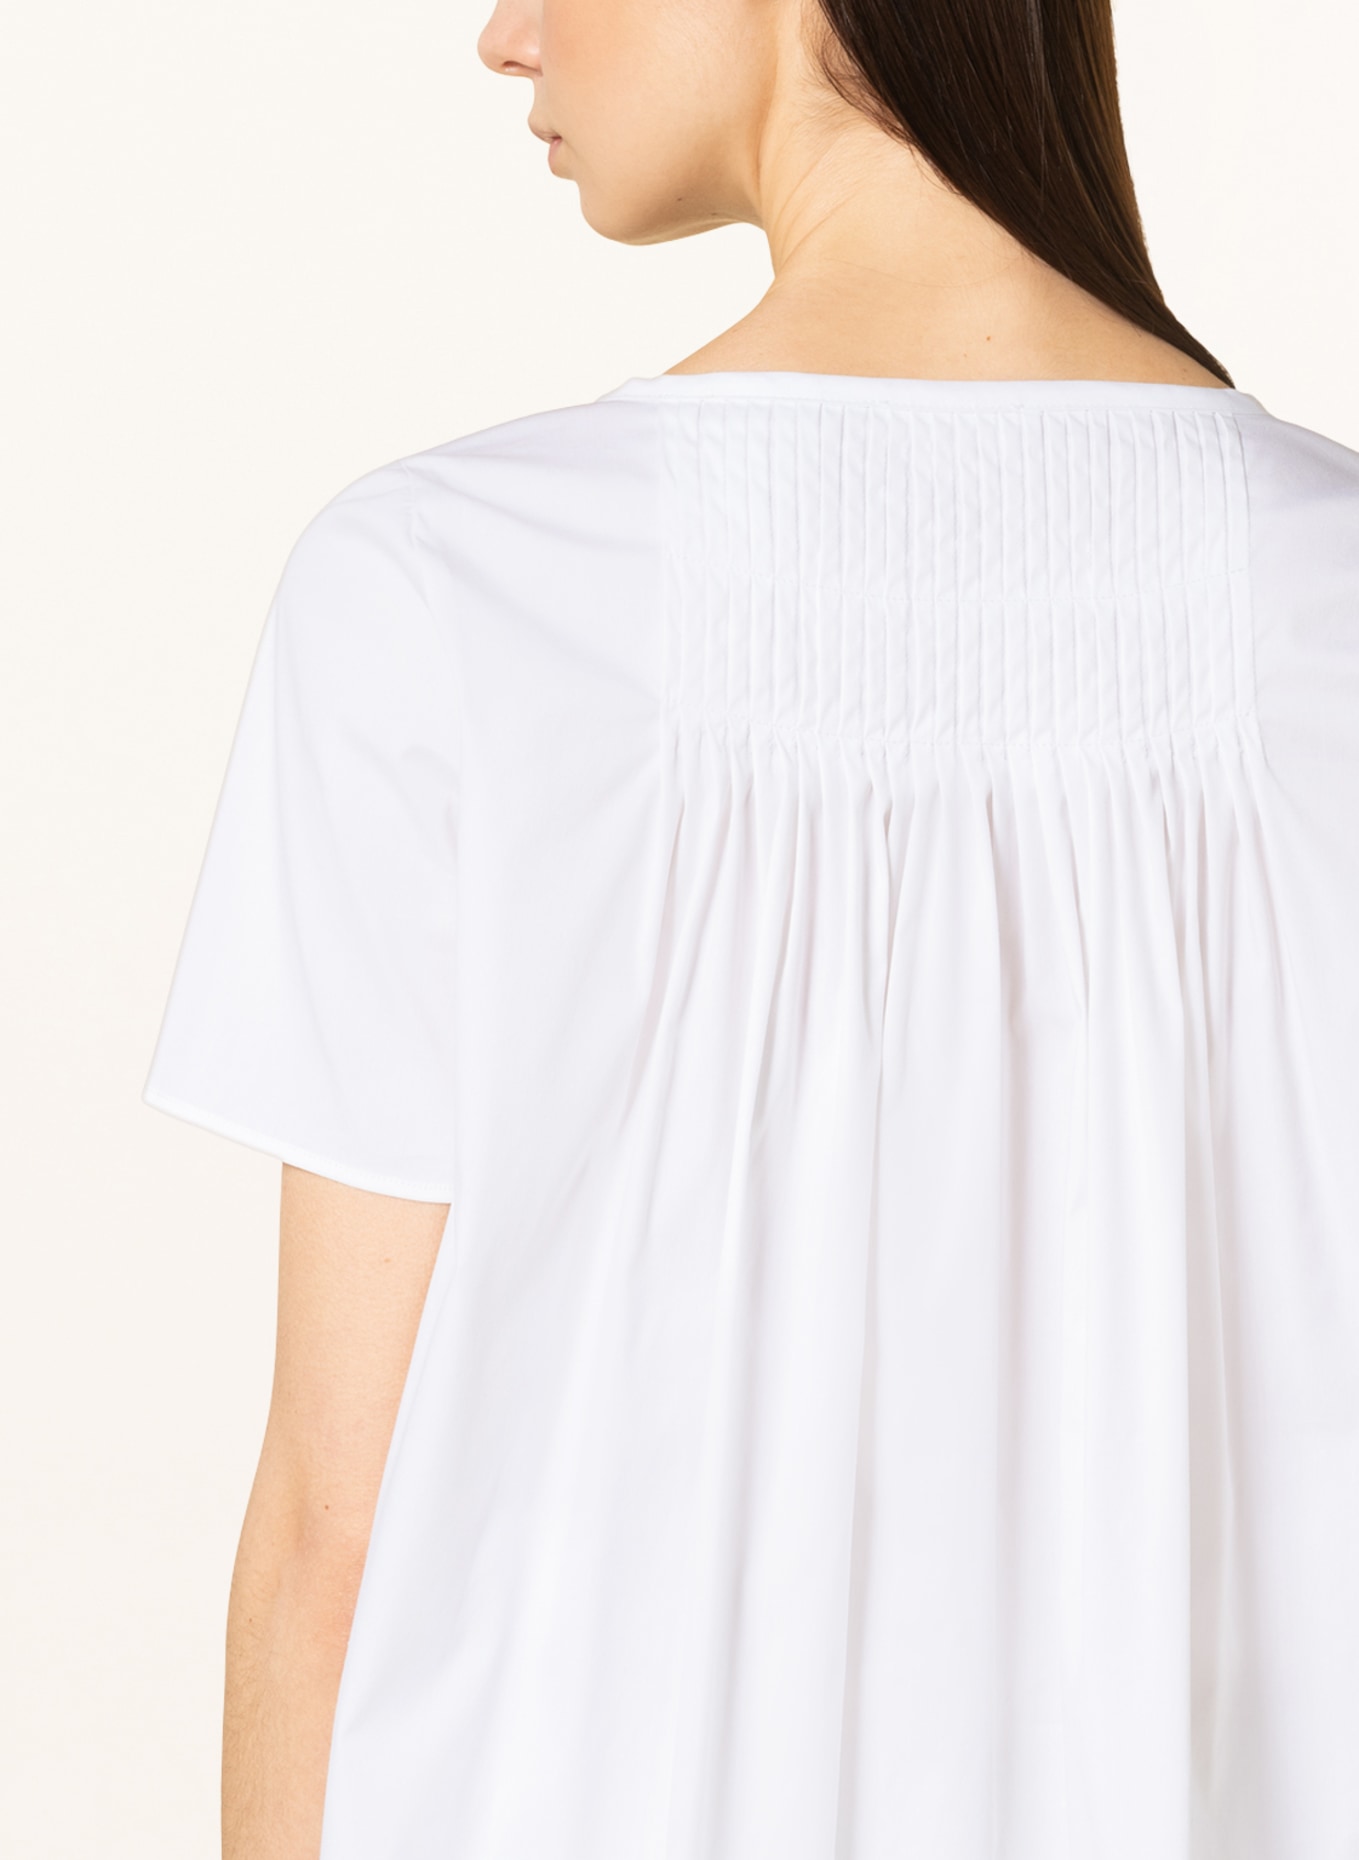 RIANI Oversized blouse top , Color: WHITE (Image 4)